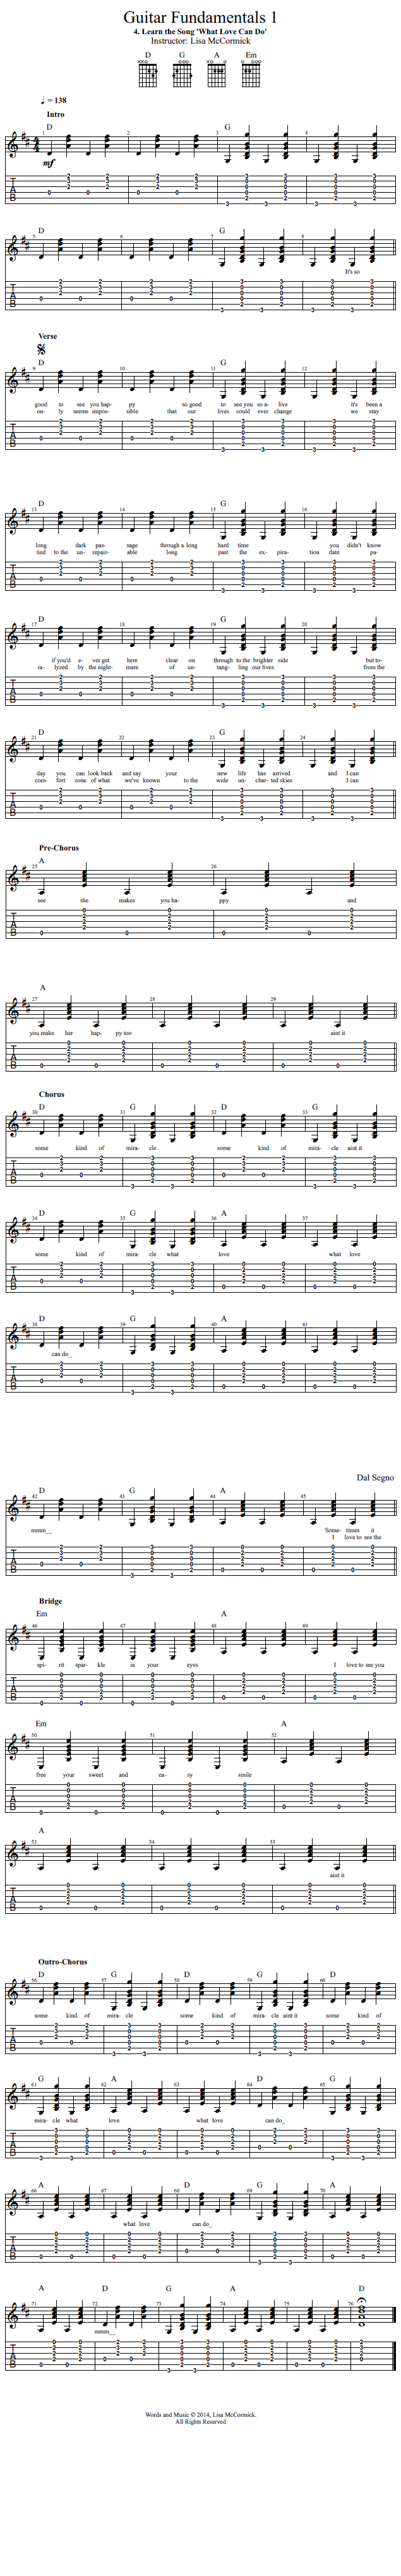 Learn the Song 'What Love Can Do' song notation